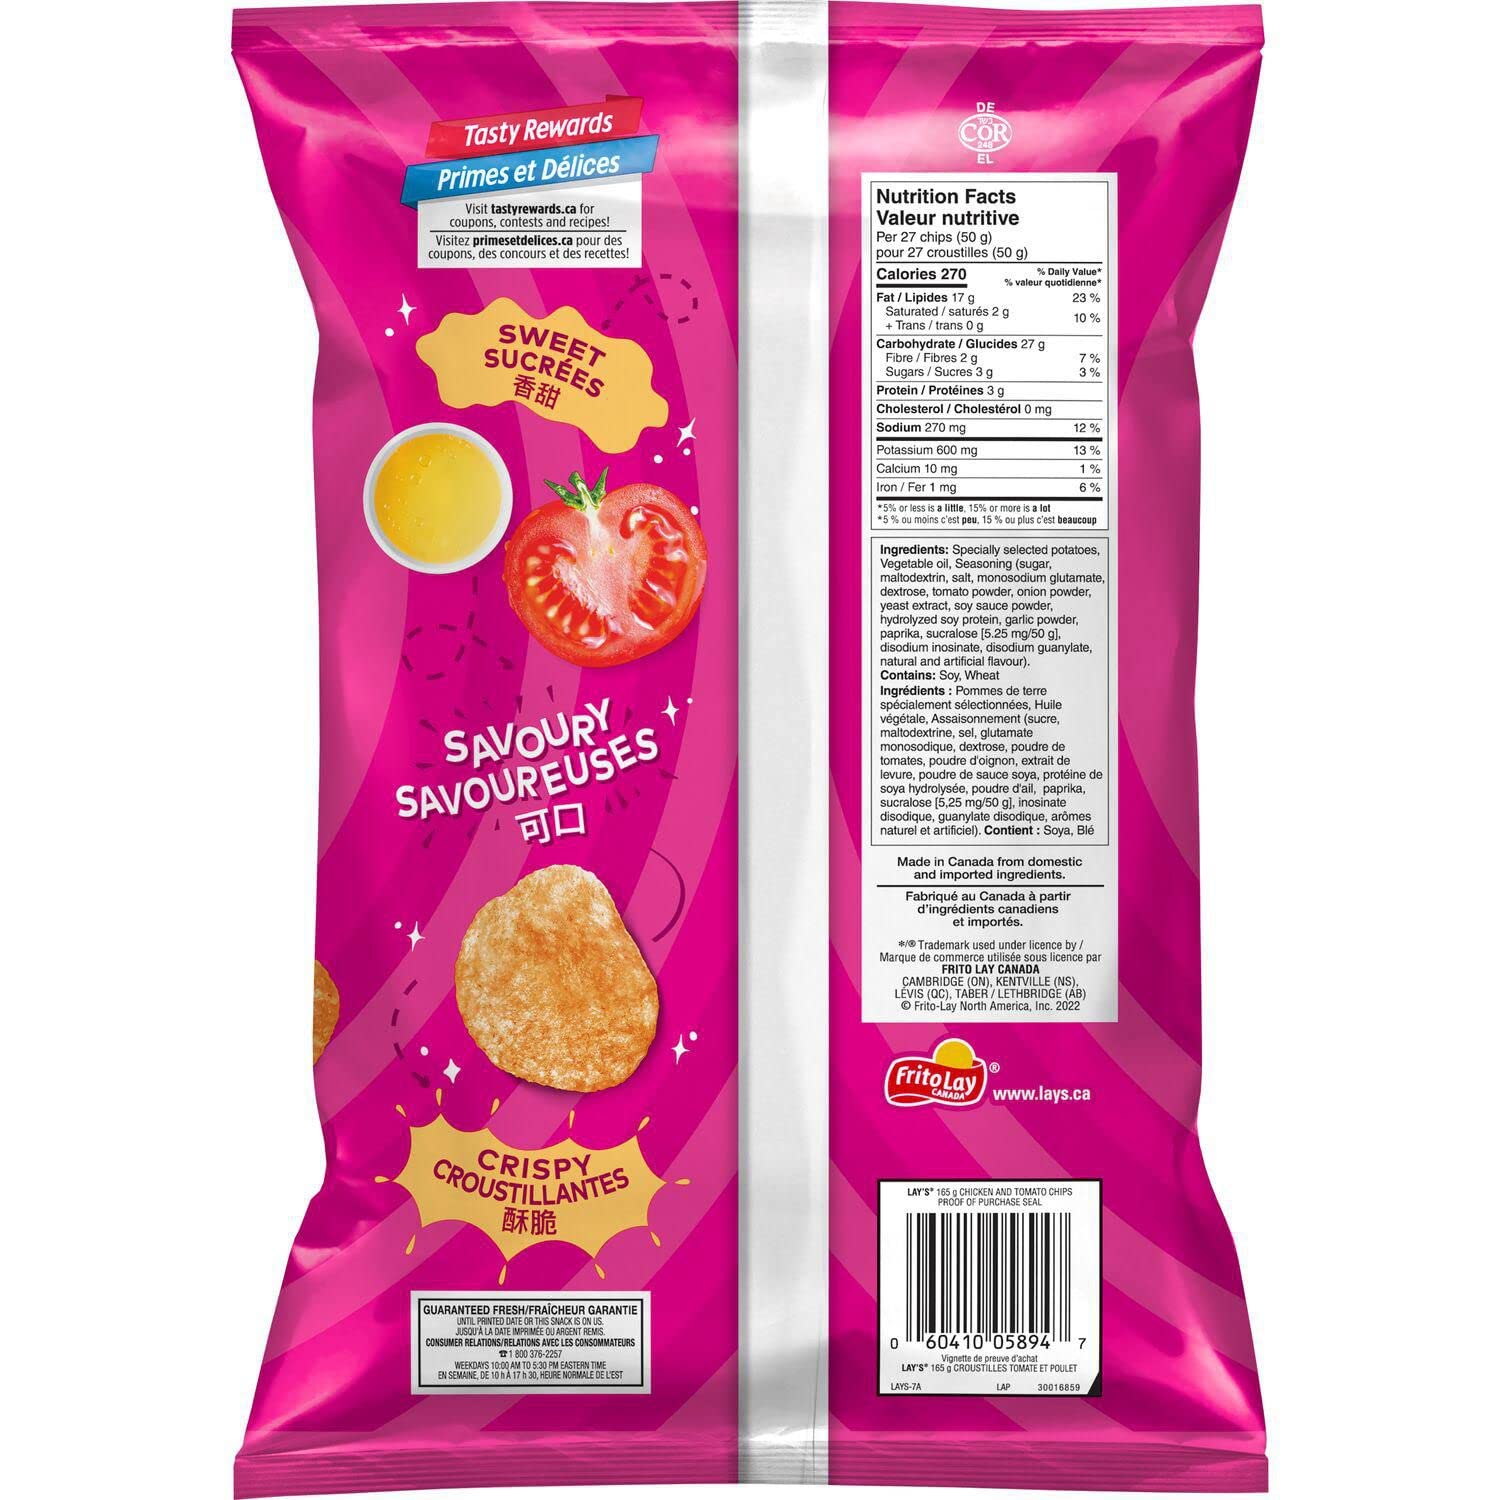 Lays Chicken and Tomato Potato Chips back cover